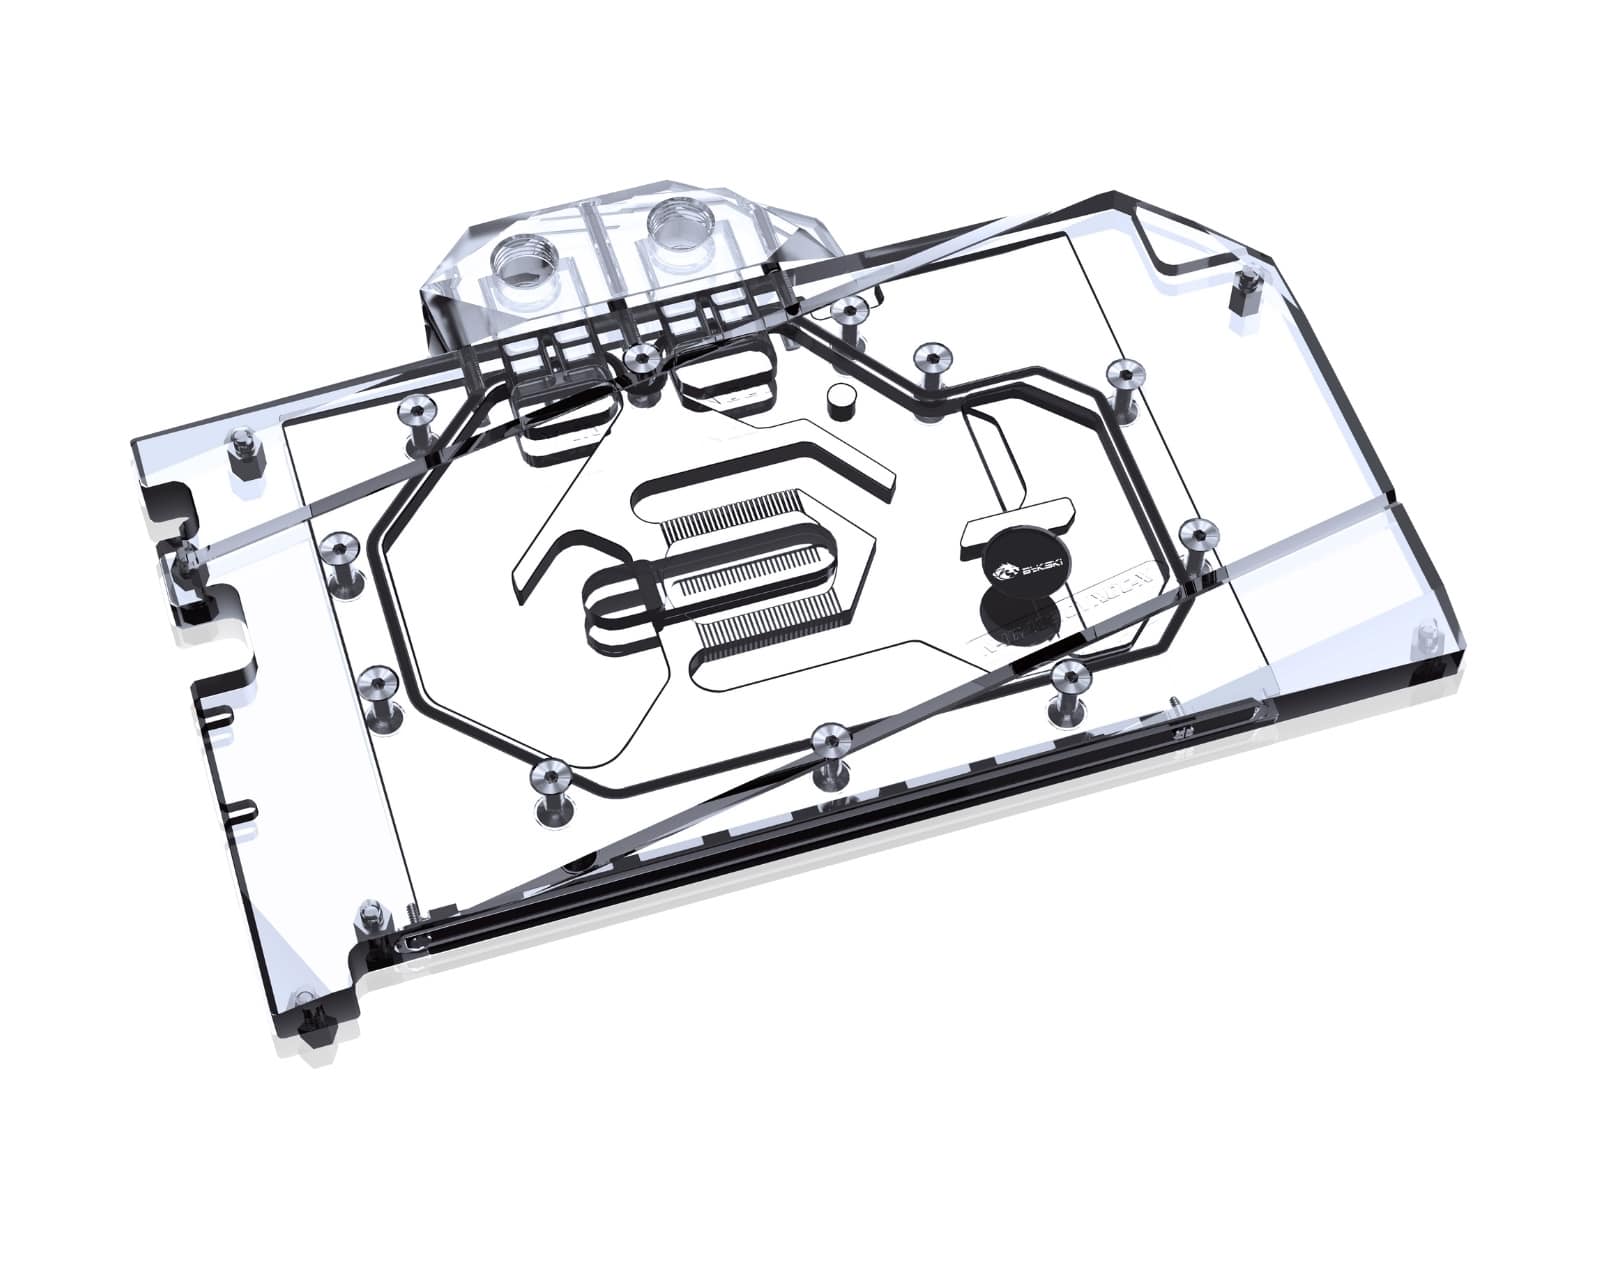 Bykski Full Coverage GPU Water Block and Backplate for Colorful iGame RTX 4090 Vulcan OC (N-IG4090VXOC-X) - PrimoChill - KEEPING IT COOL